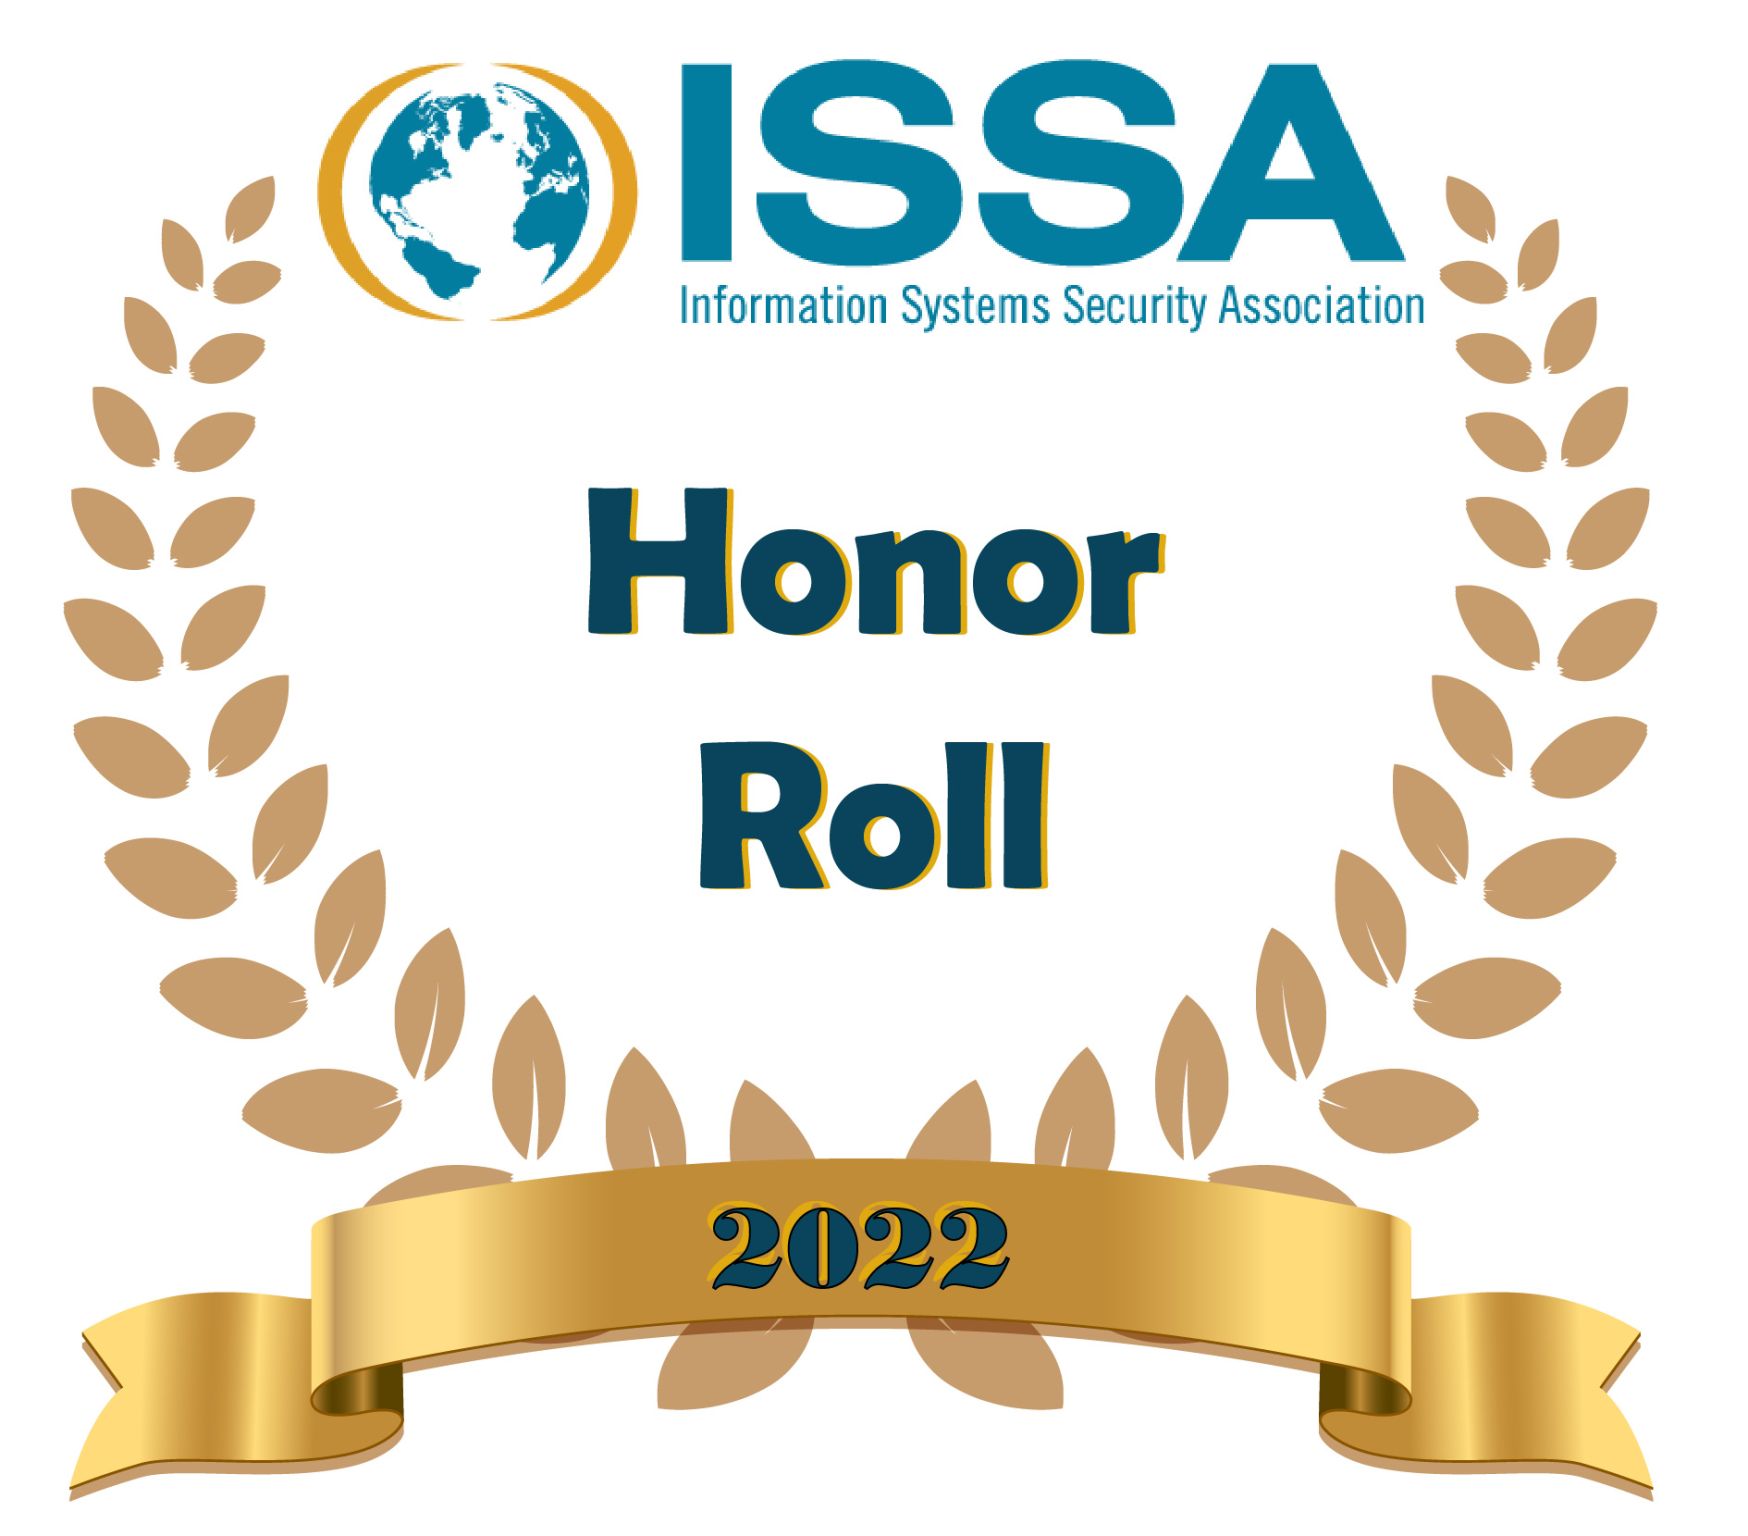 Dr. Mohamed El-guindy has been chosen as a finalist for the ISSA Hall of Fame Award